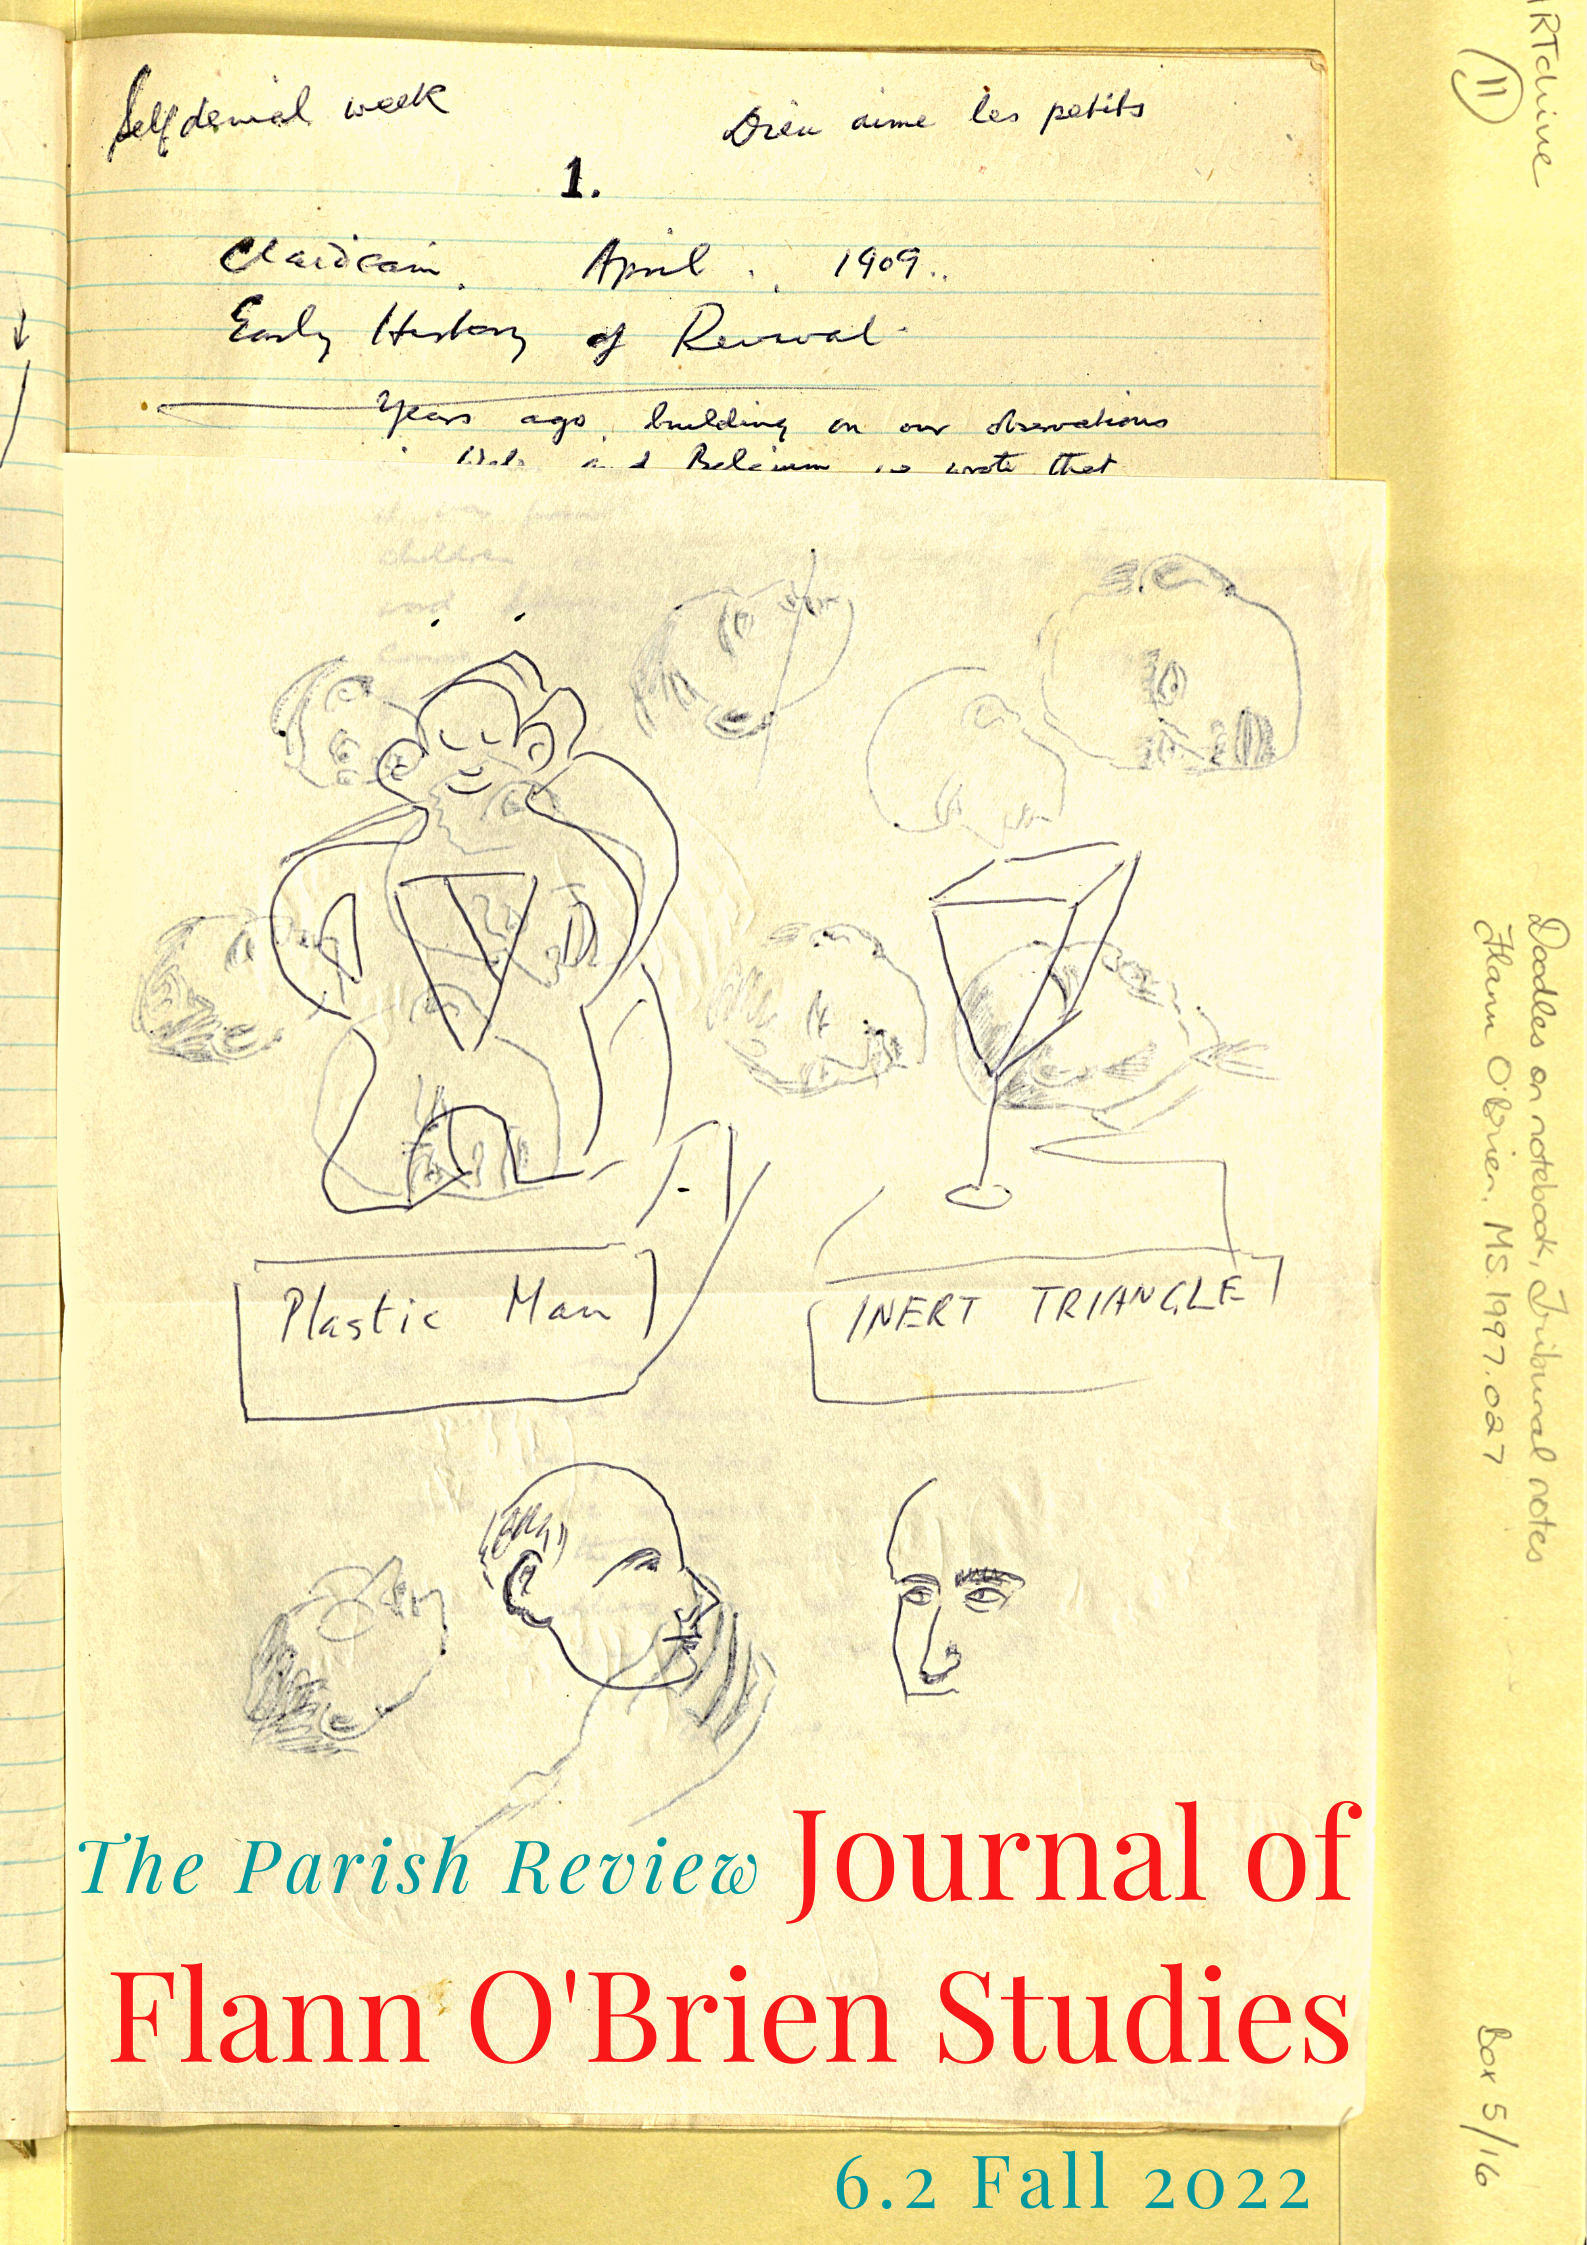 Just Doodling? Brian Ó Nualláin’s ‘Tribunal of Inquiry into the Fire at St Joseph’s Orphanage Cavan’ Notebook